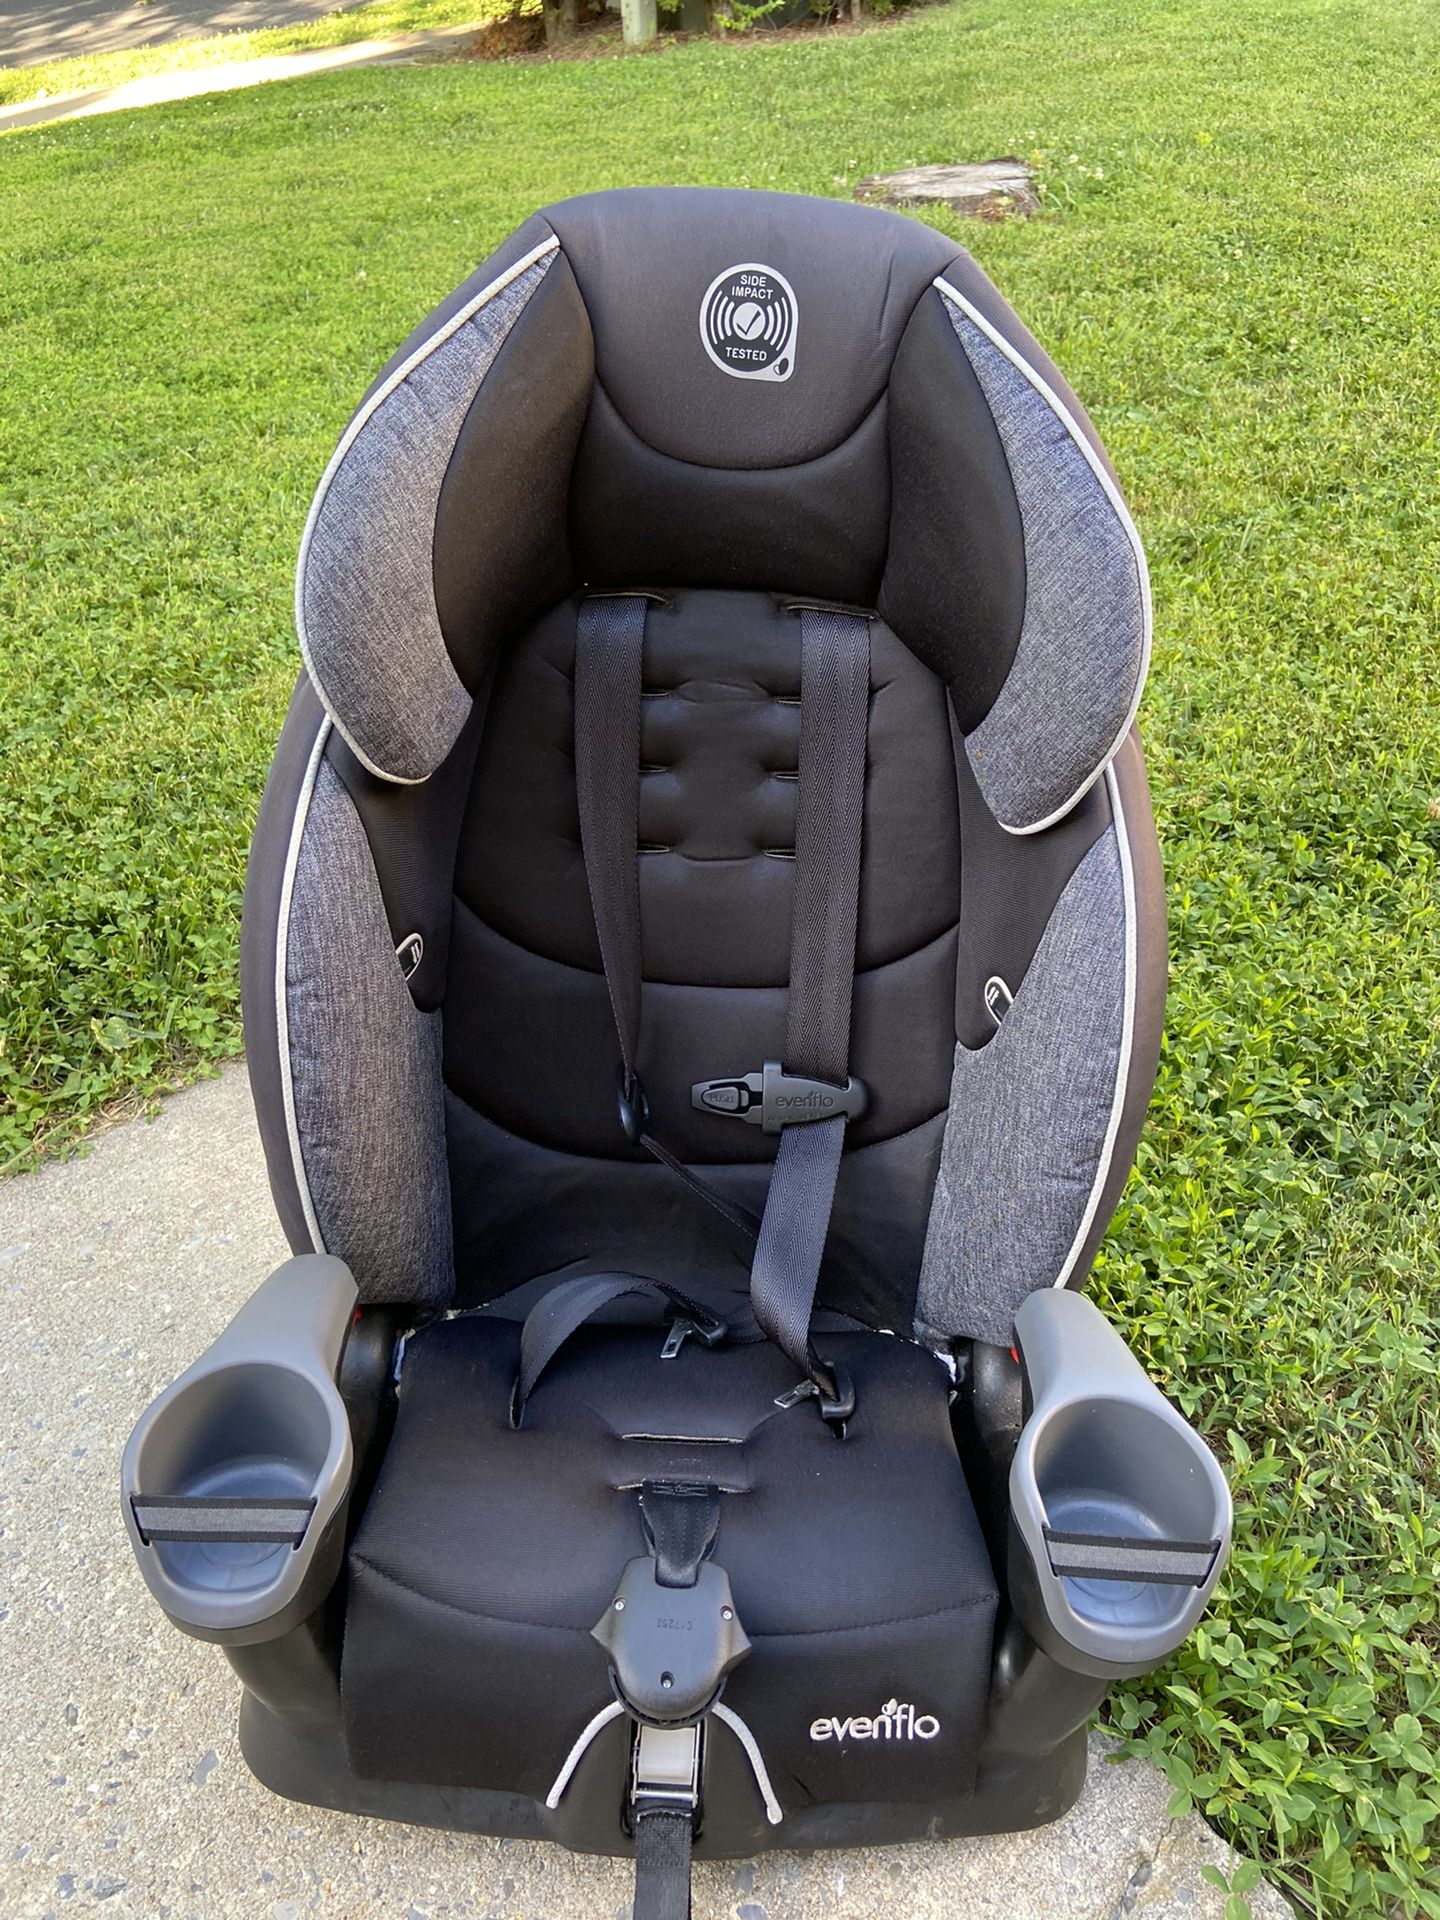 Evenflo advanced chase Booster car seat